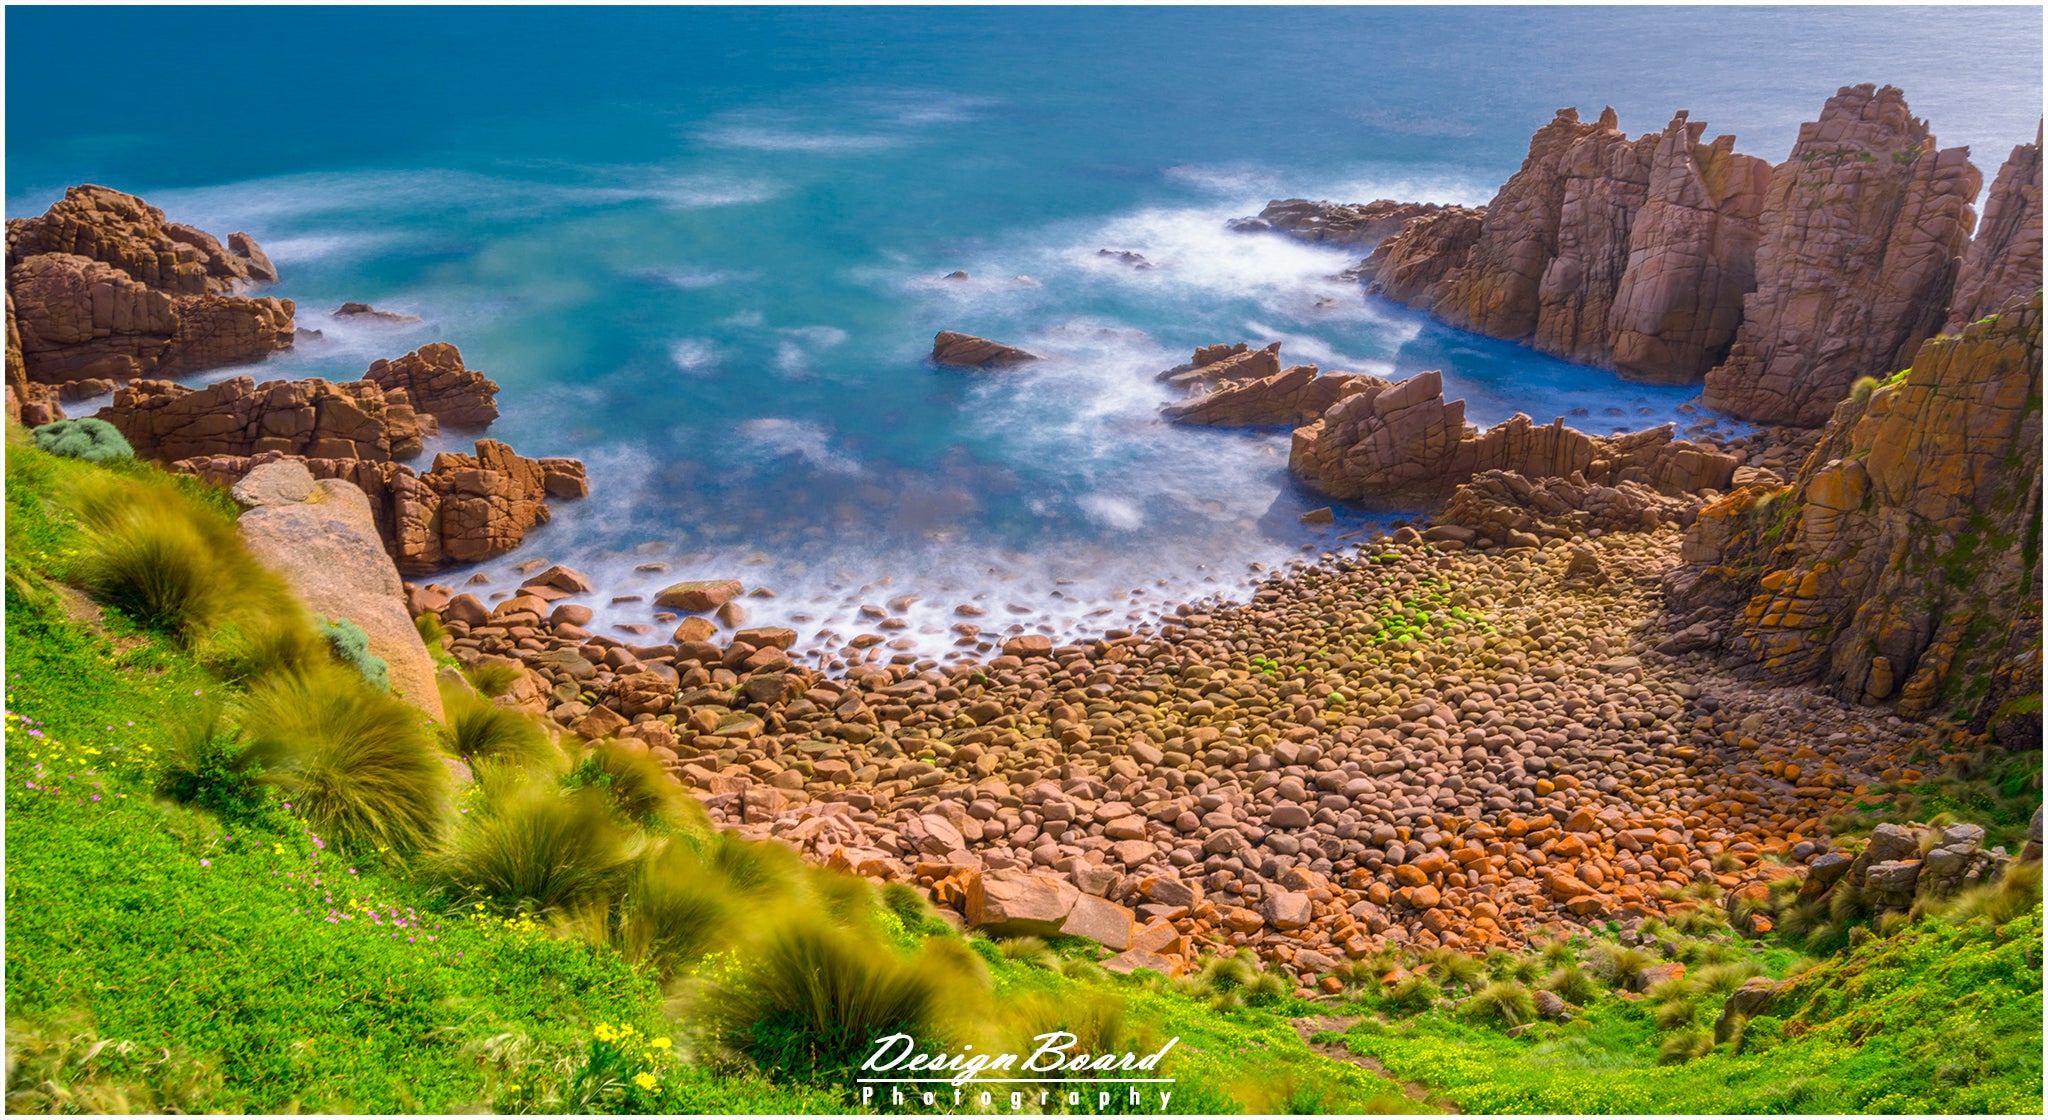 The Pinnacles, Phillip Island - The view from the top